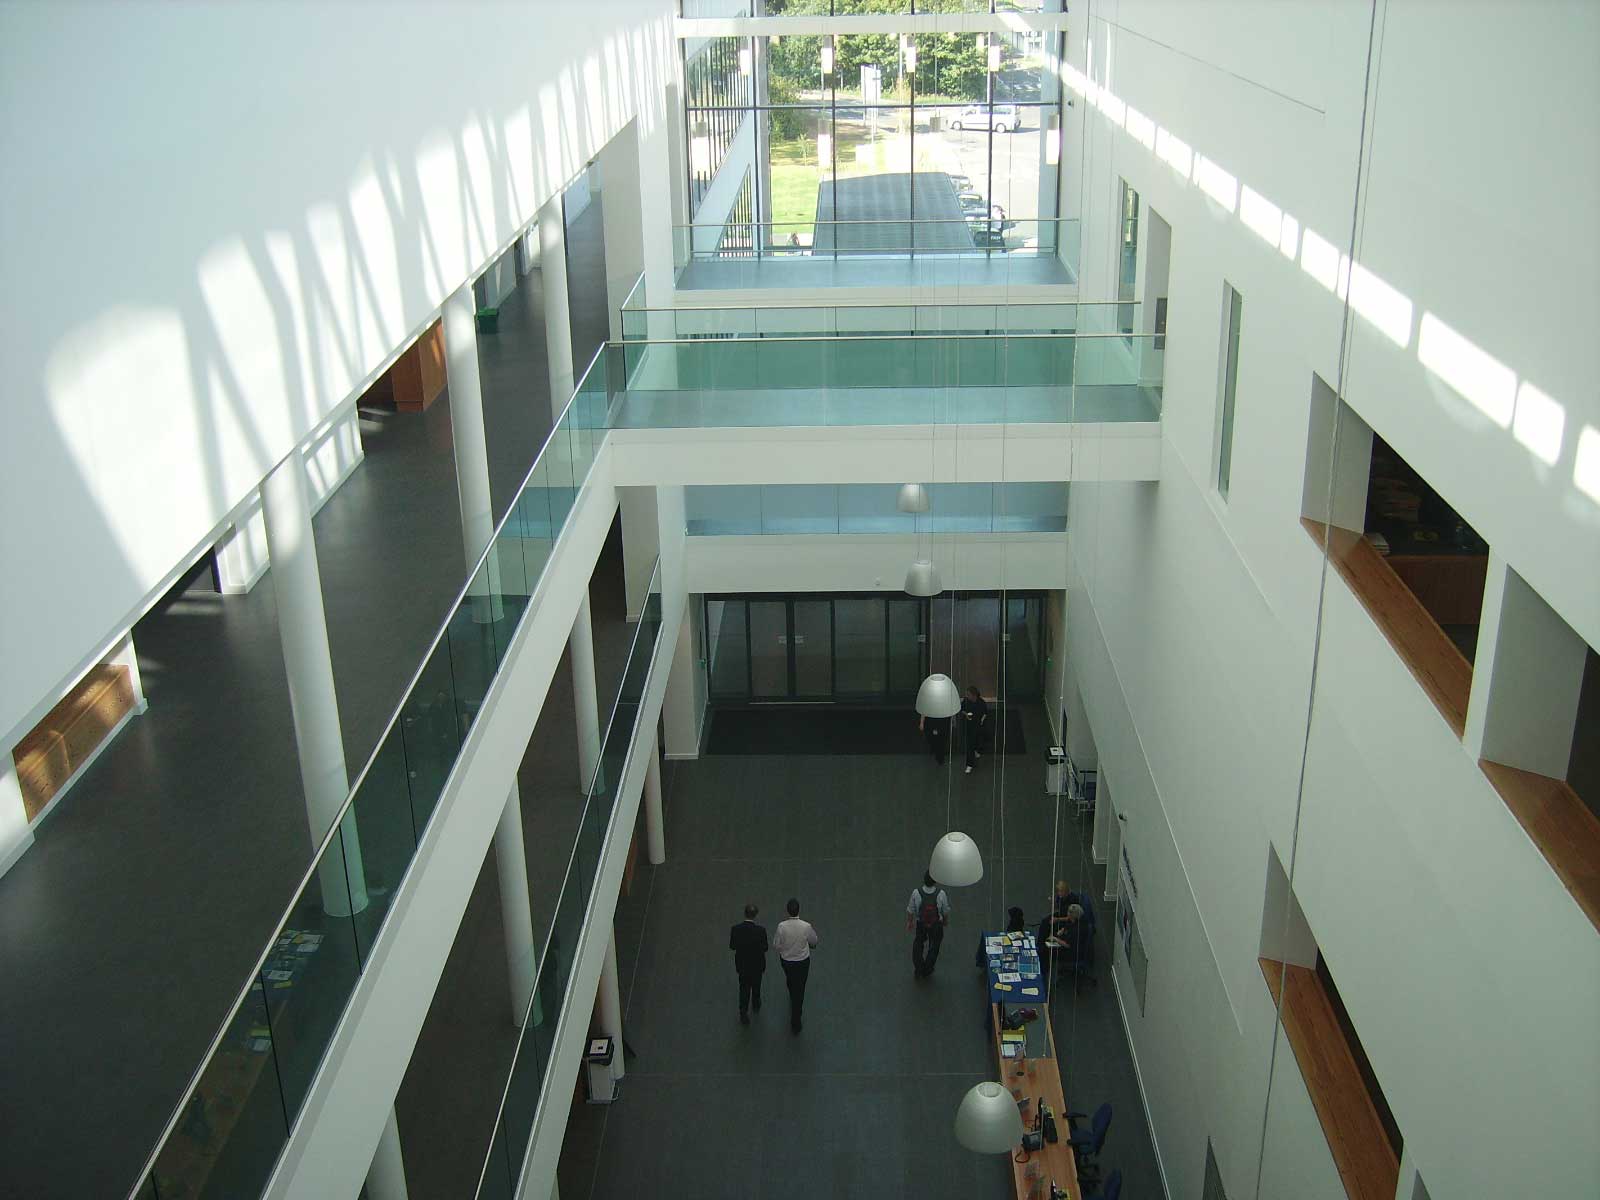 A view into an open atrium like reception with staircases and light fixtures hanging into the space